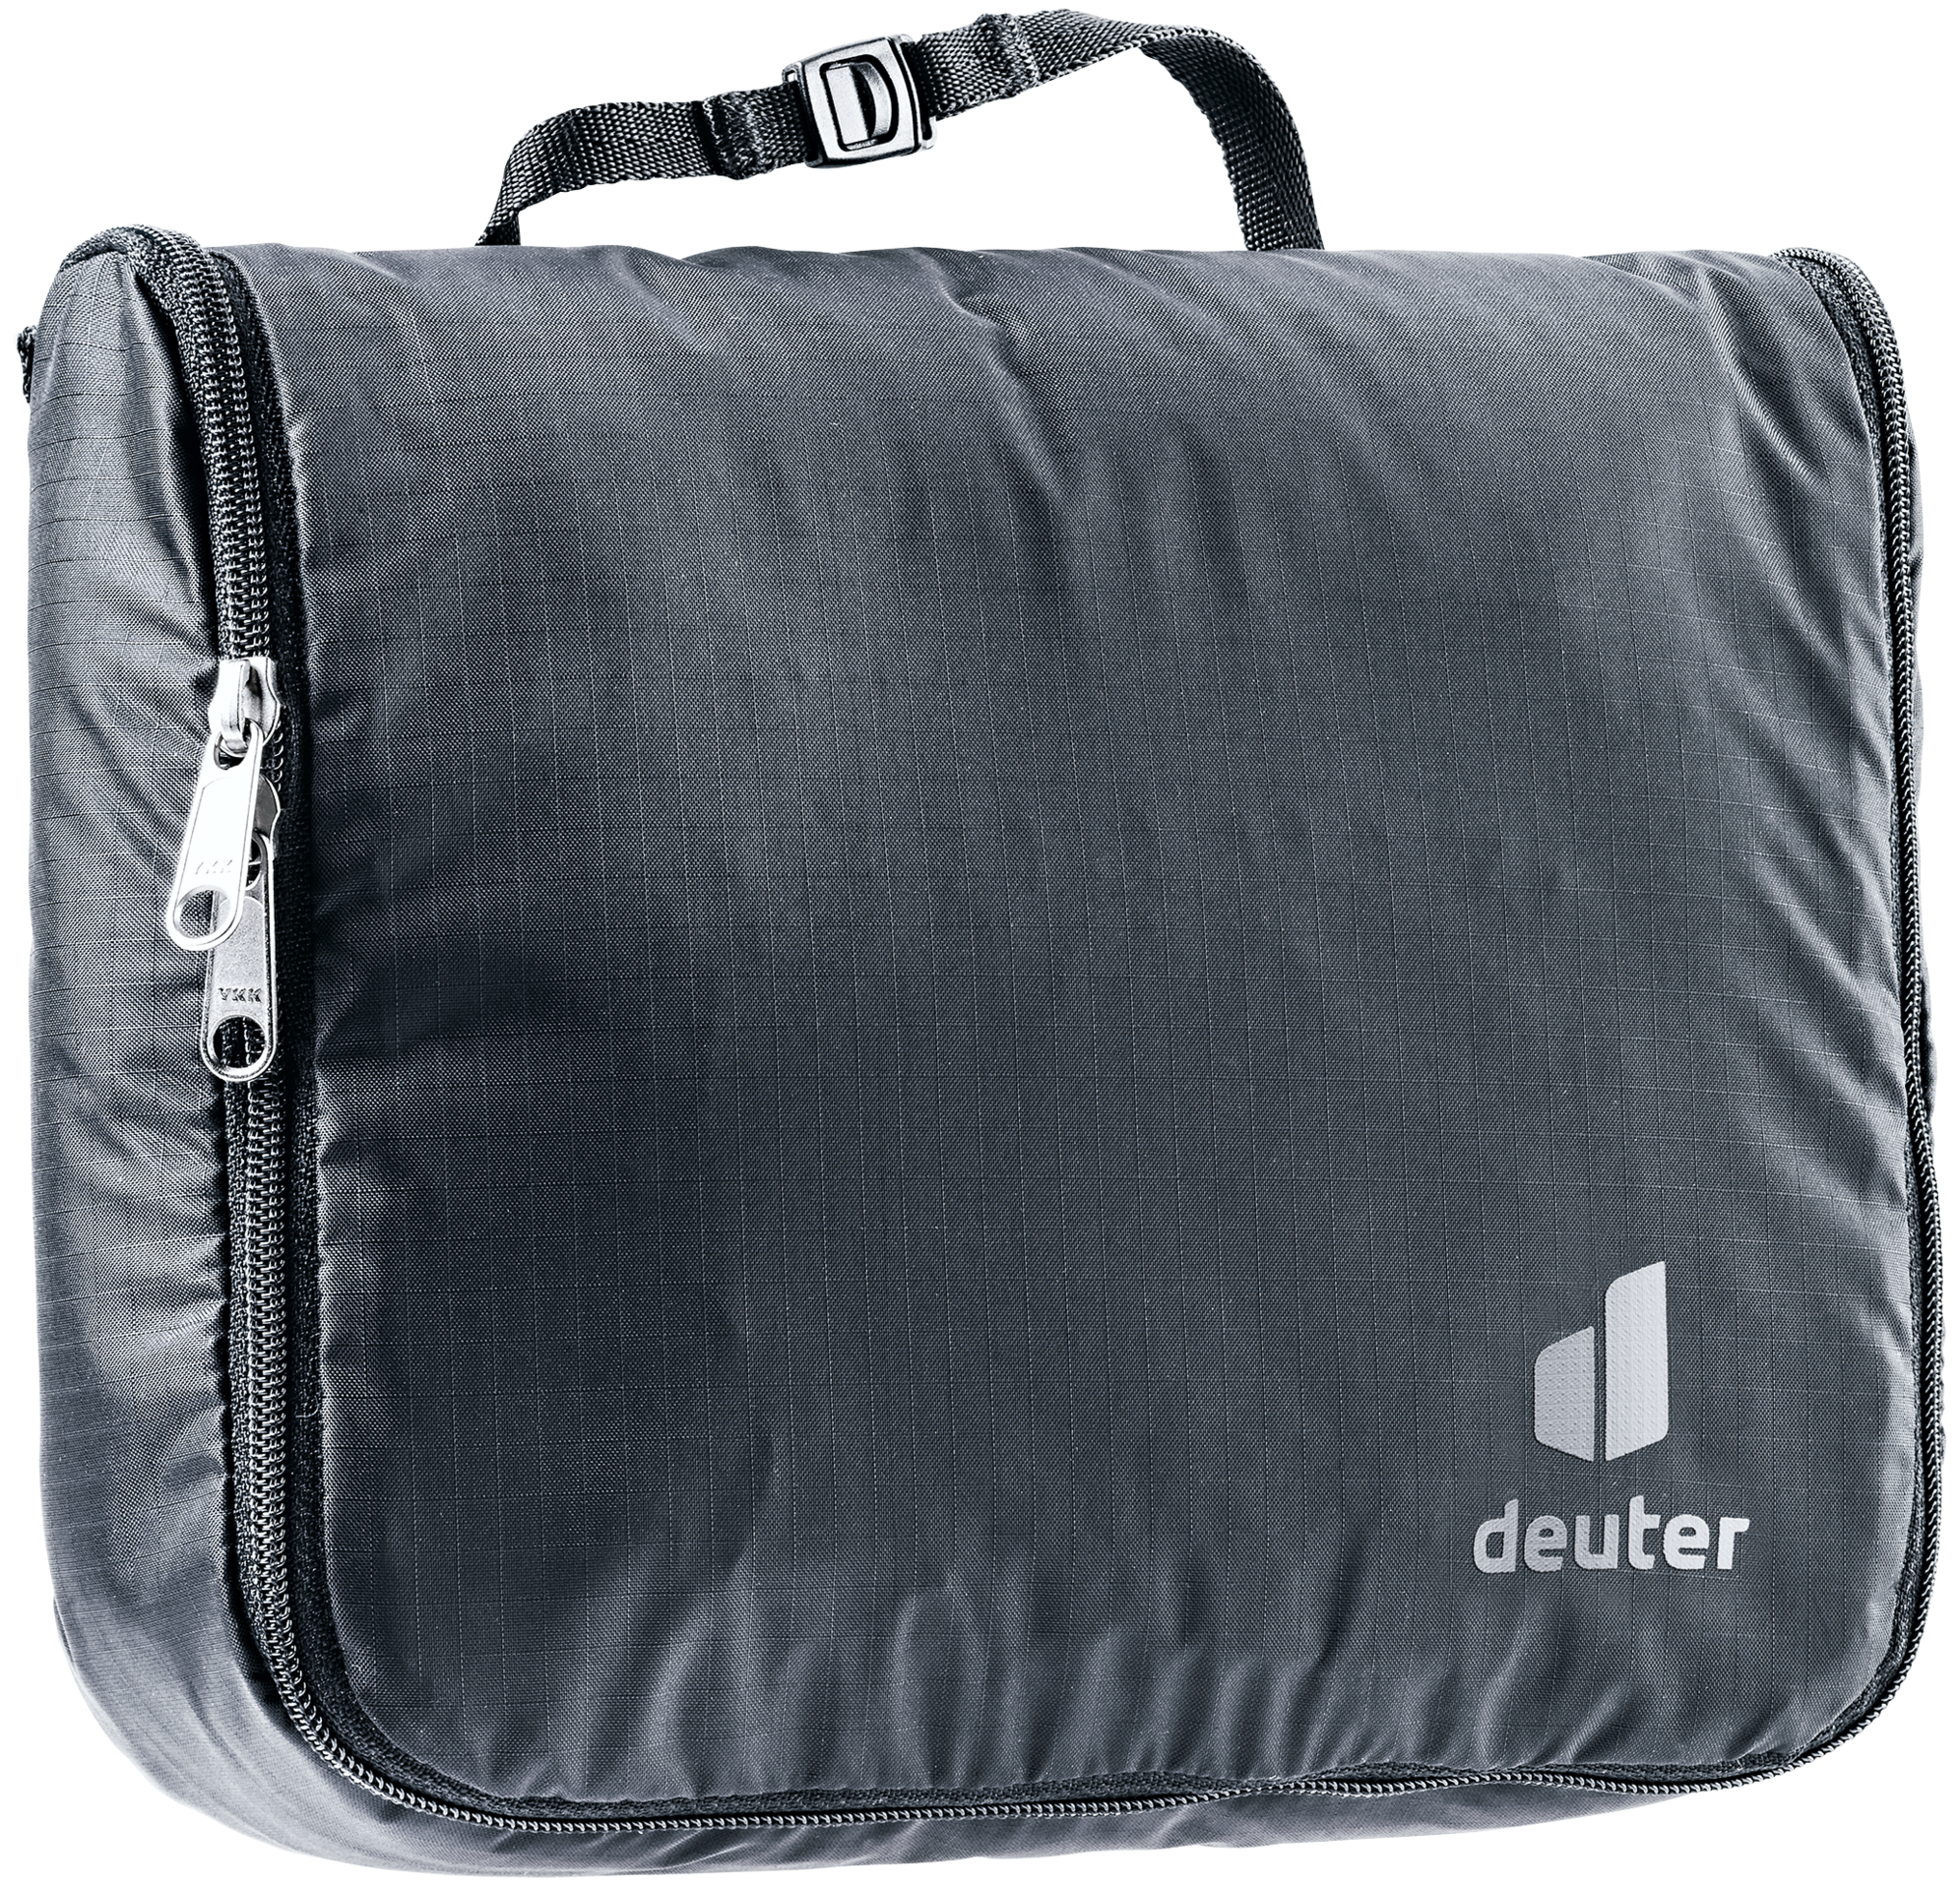 https://dk0fkjygbn9vu.cloudfront.net/cache-buster-11701909050/deuter/mediaroom/product-images/accessories/toiletry-bags/40415/image-thumb__40415__deuter_lightbox-img/3930521-7000-WashCenterLiteI-s20-d0.png